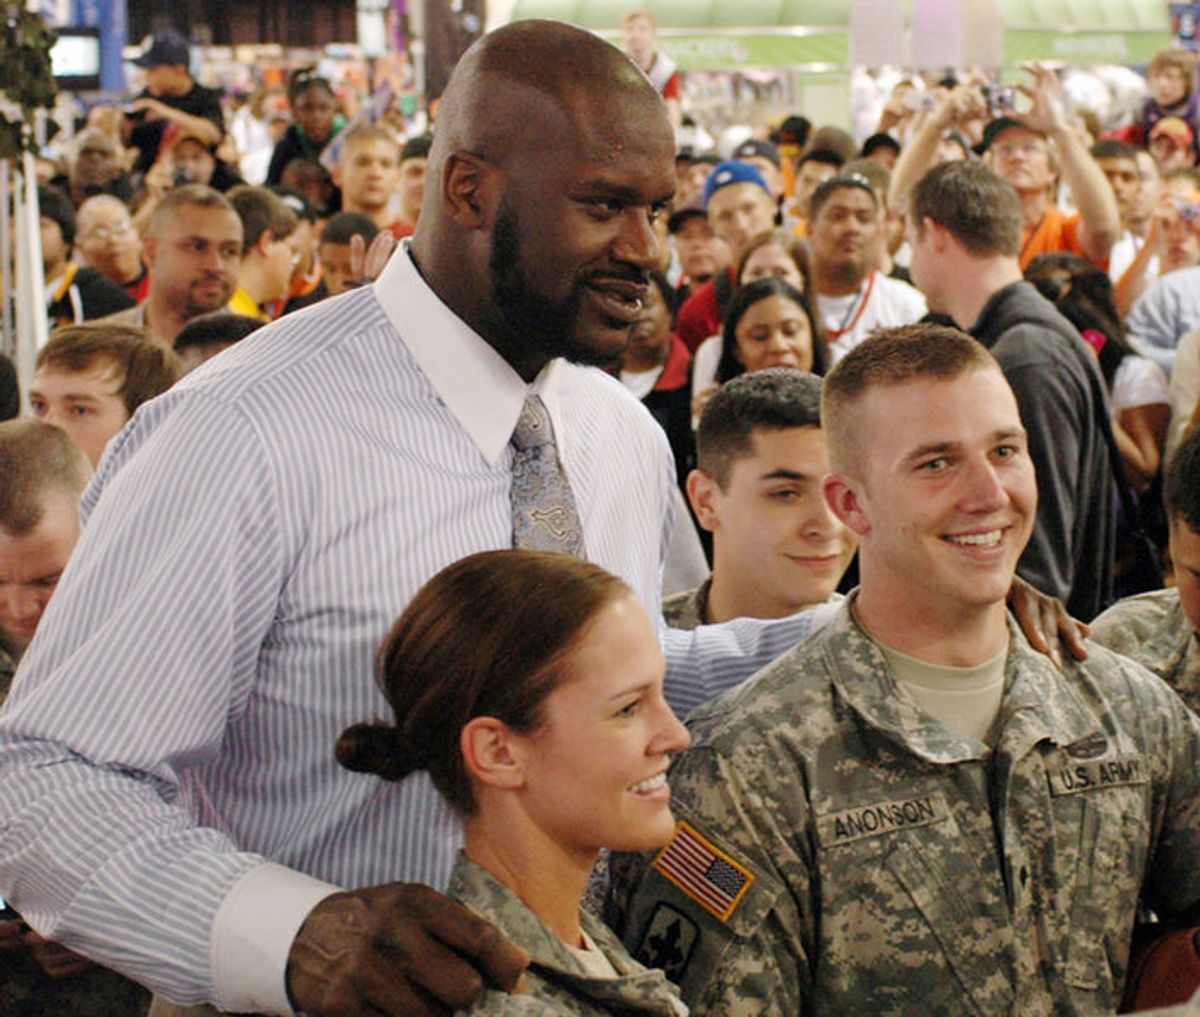 Shaq out of uniform in 2009.